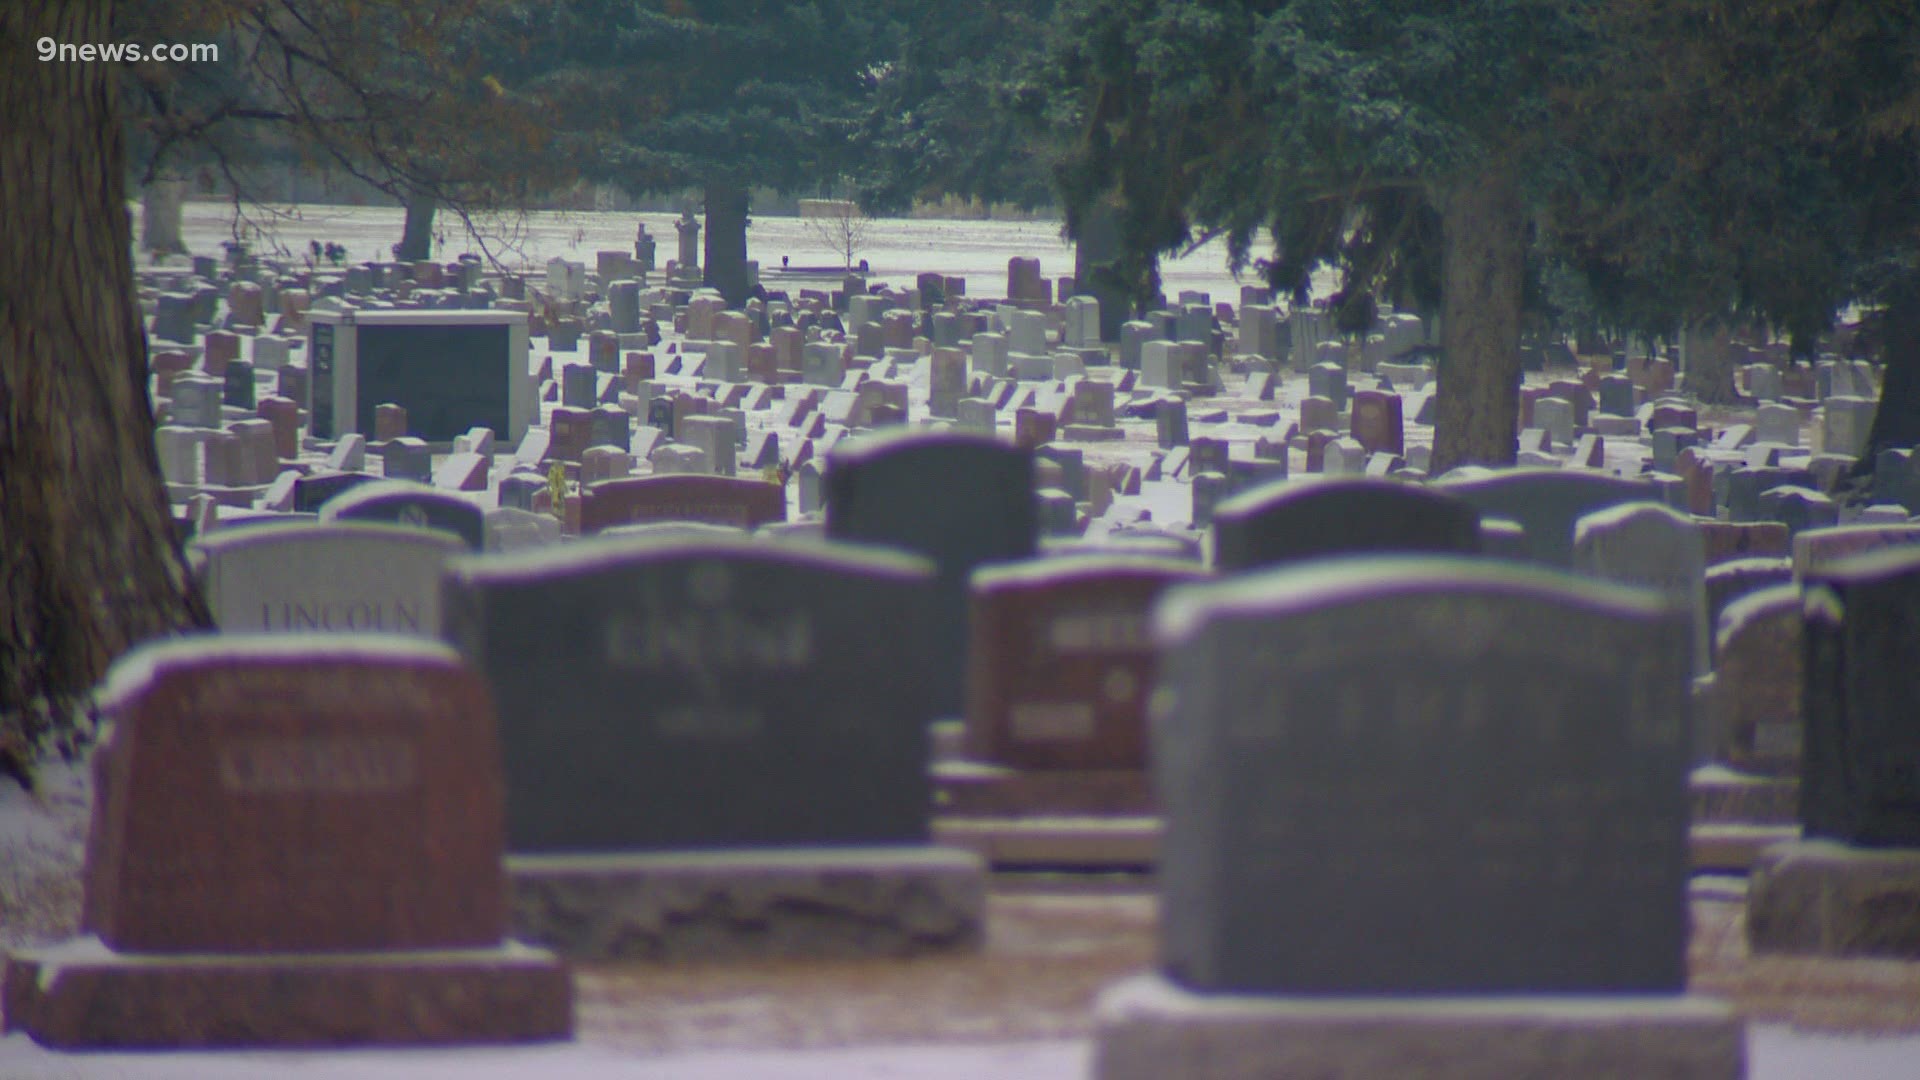 For months, funerals had to be delayed, some still postponed because of COVID restrictions.